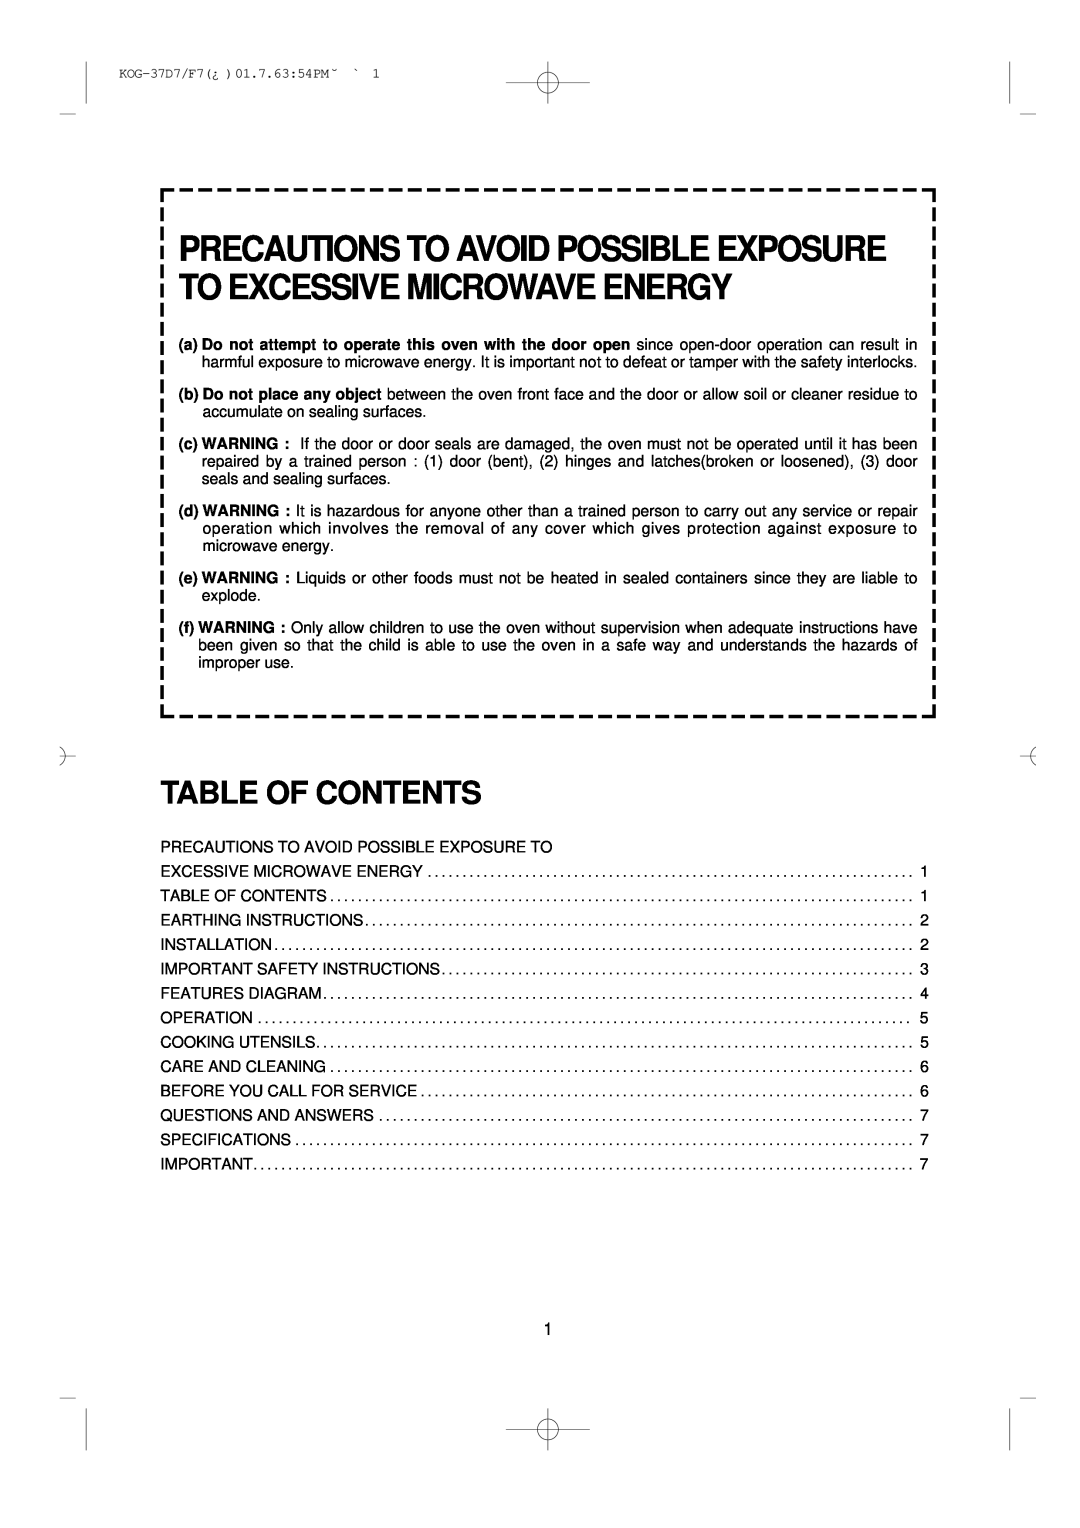 Daewoo KOG-37D7/F7 manual Table Of Contents, Precautions To Avoid Possible Exposure To Excessive Microwave Energy 